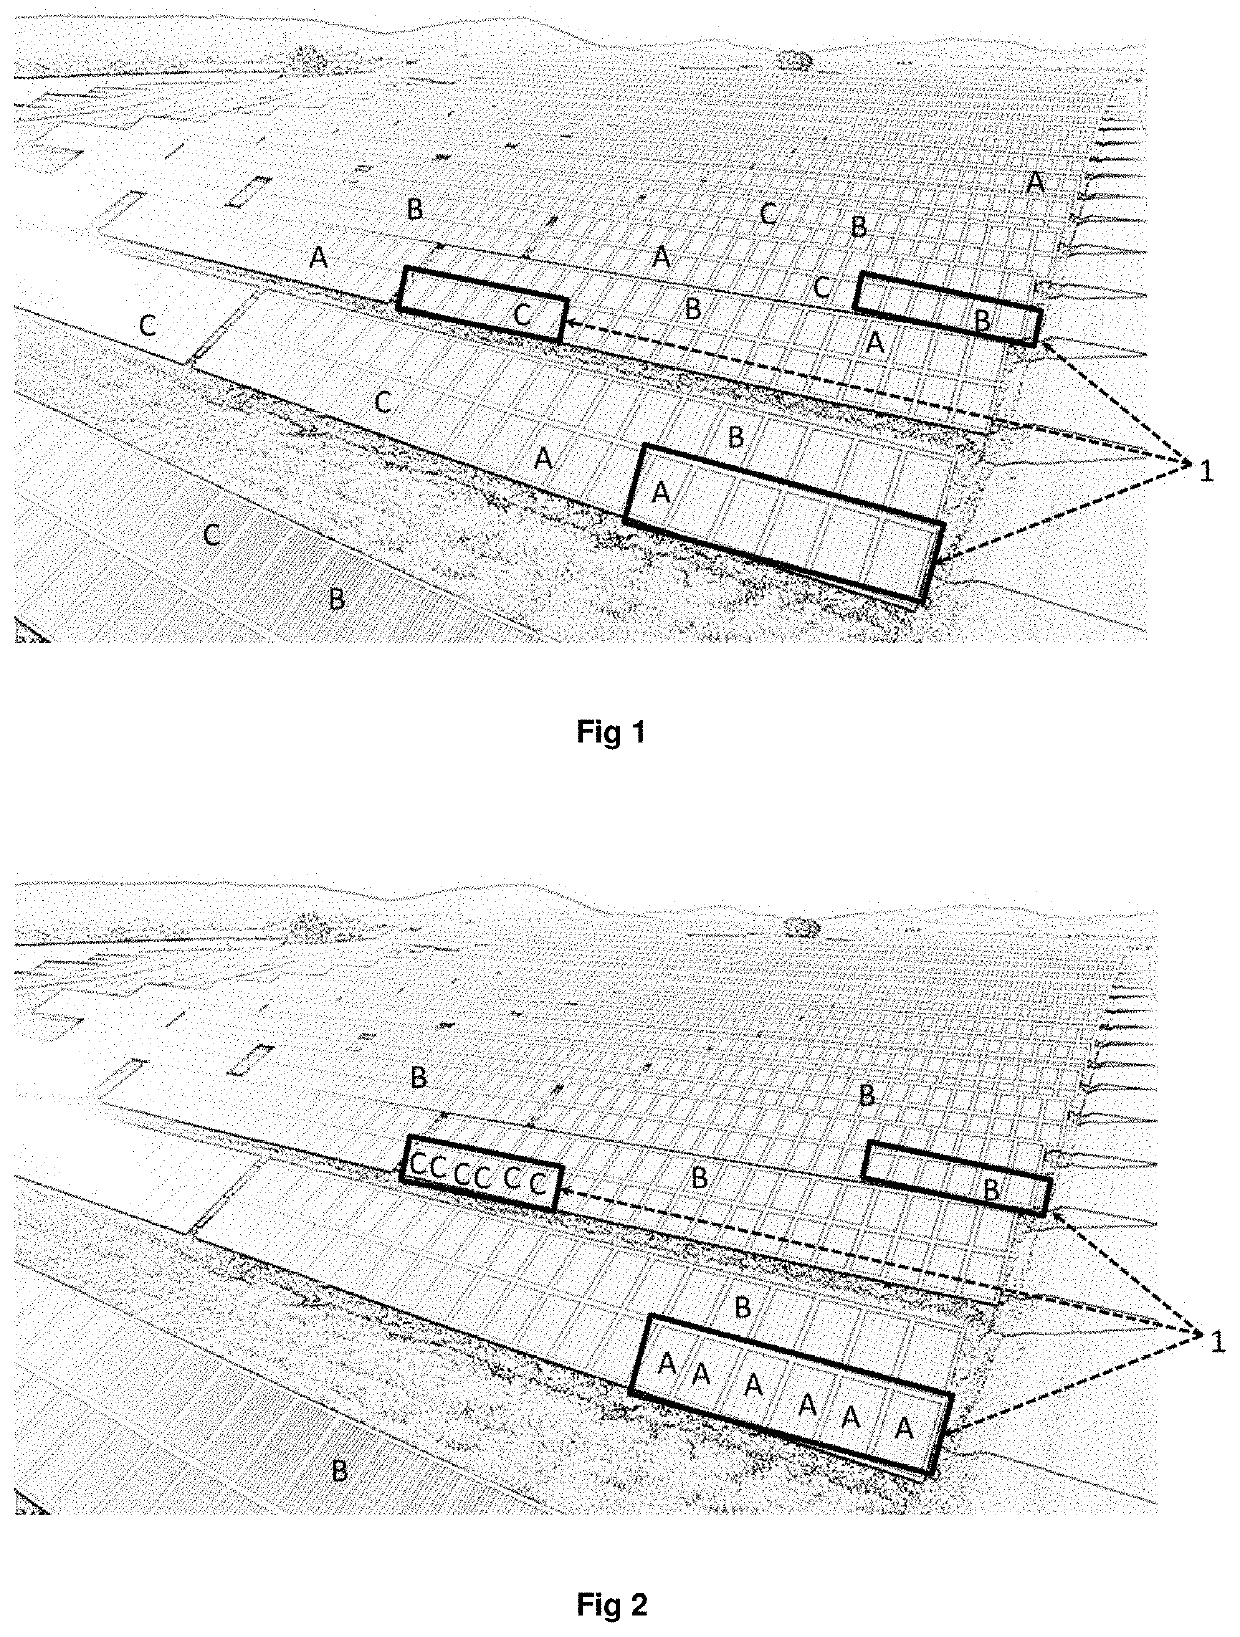 Method for Optimising the Power Enhancement of Photovoltaic Solar Plants Using Smart Preventive and Predictive Maintenance